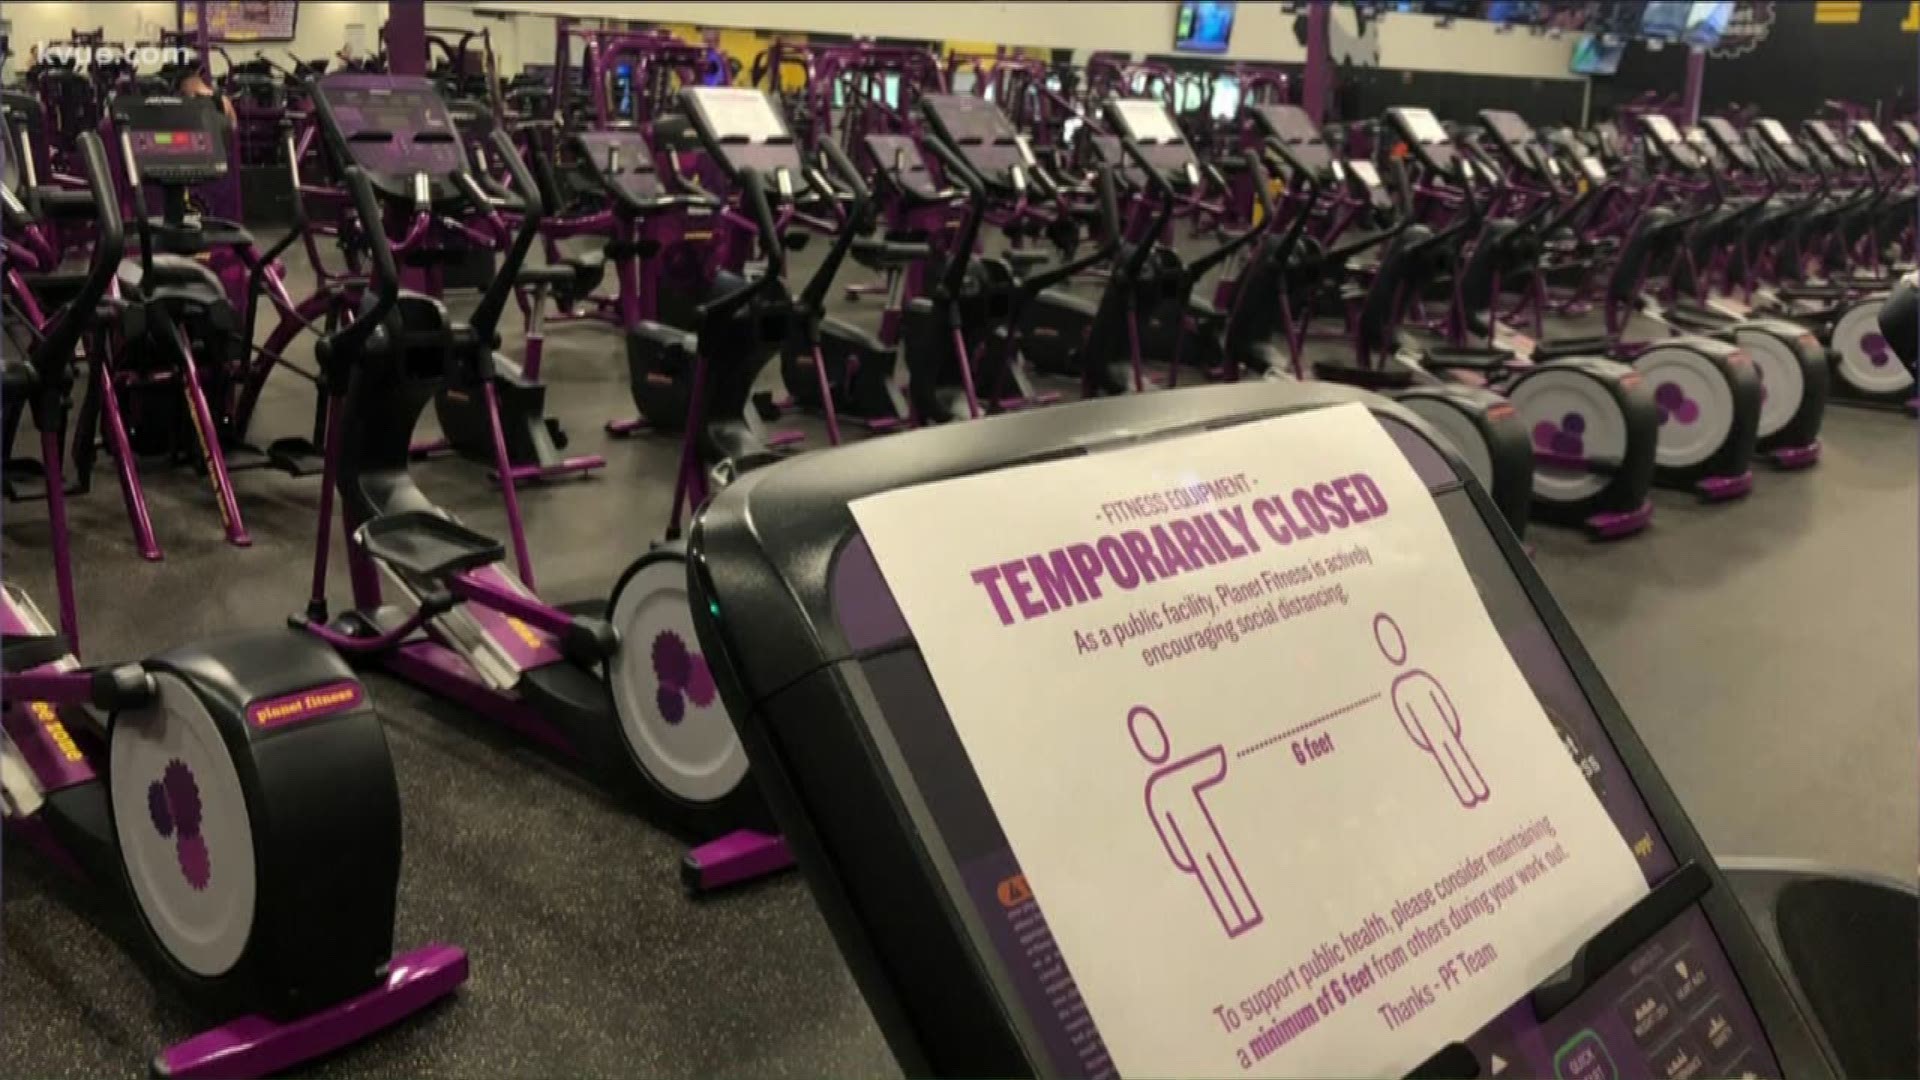 Several gym chains have announced they're temporarily shutting down.